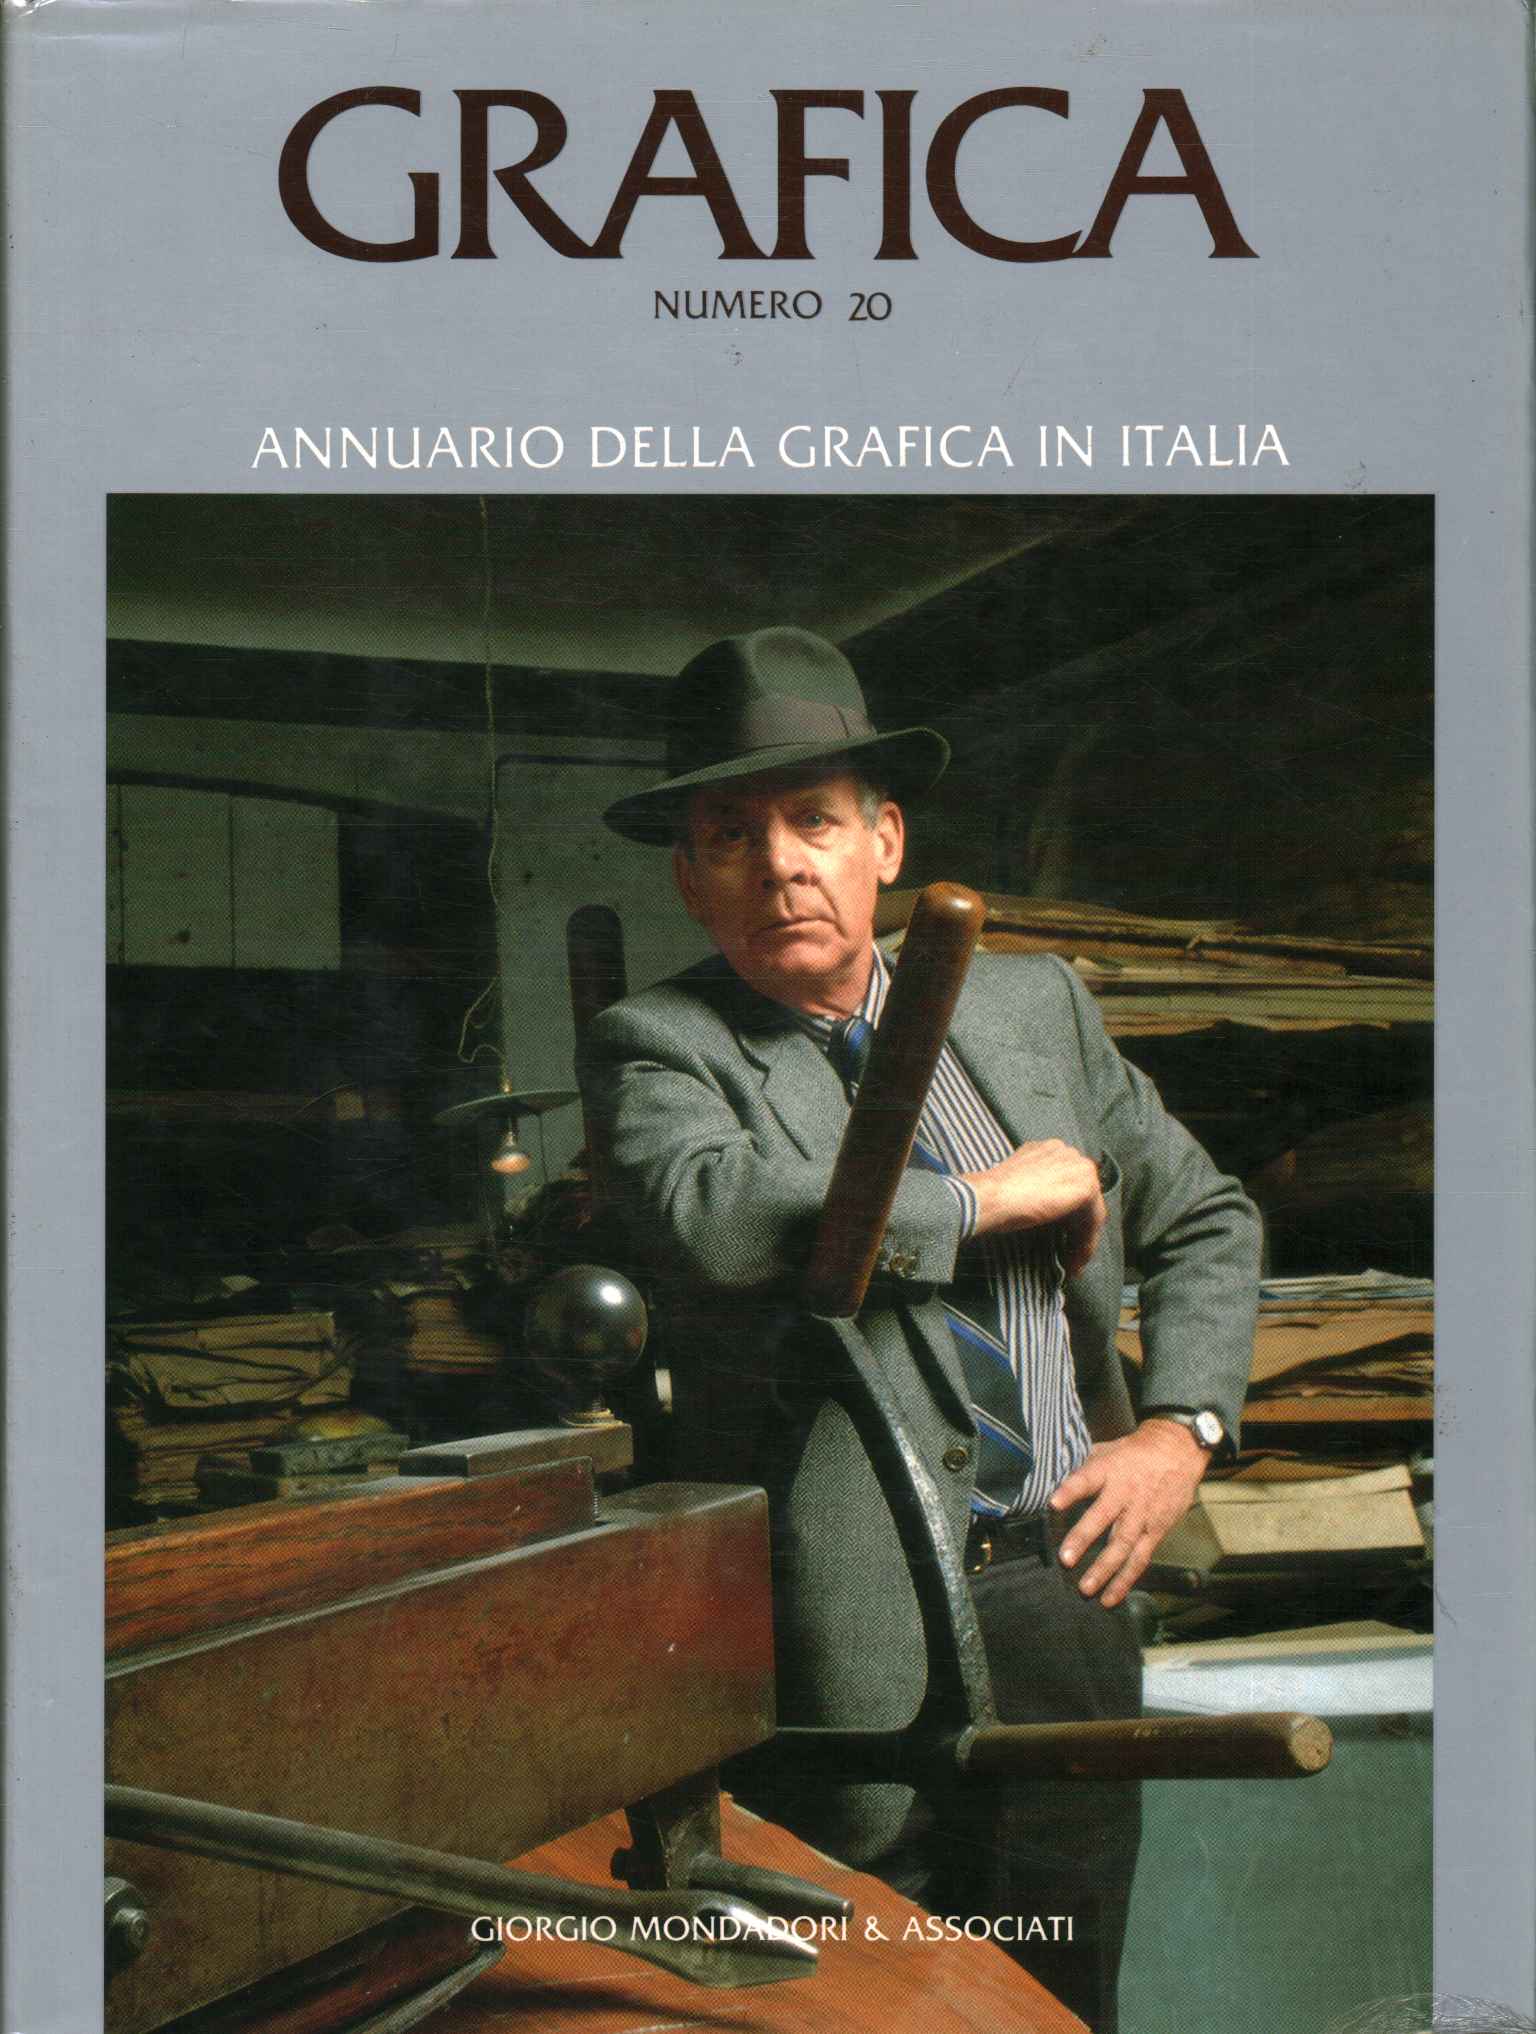 Yearbook of graphics in Italy